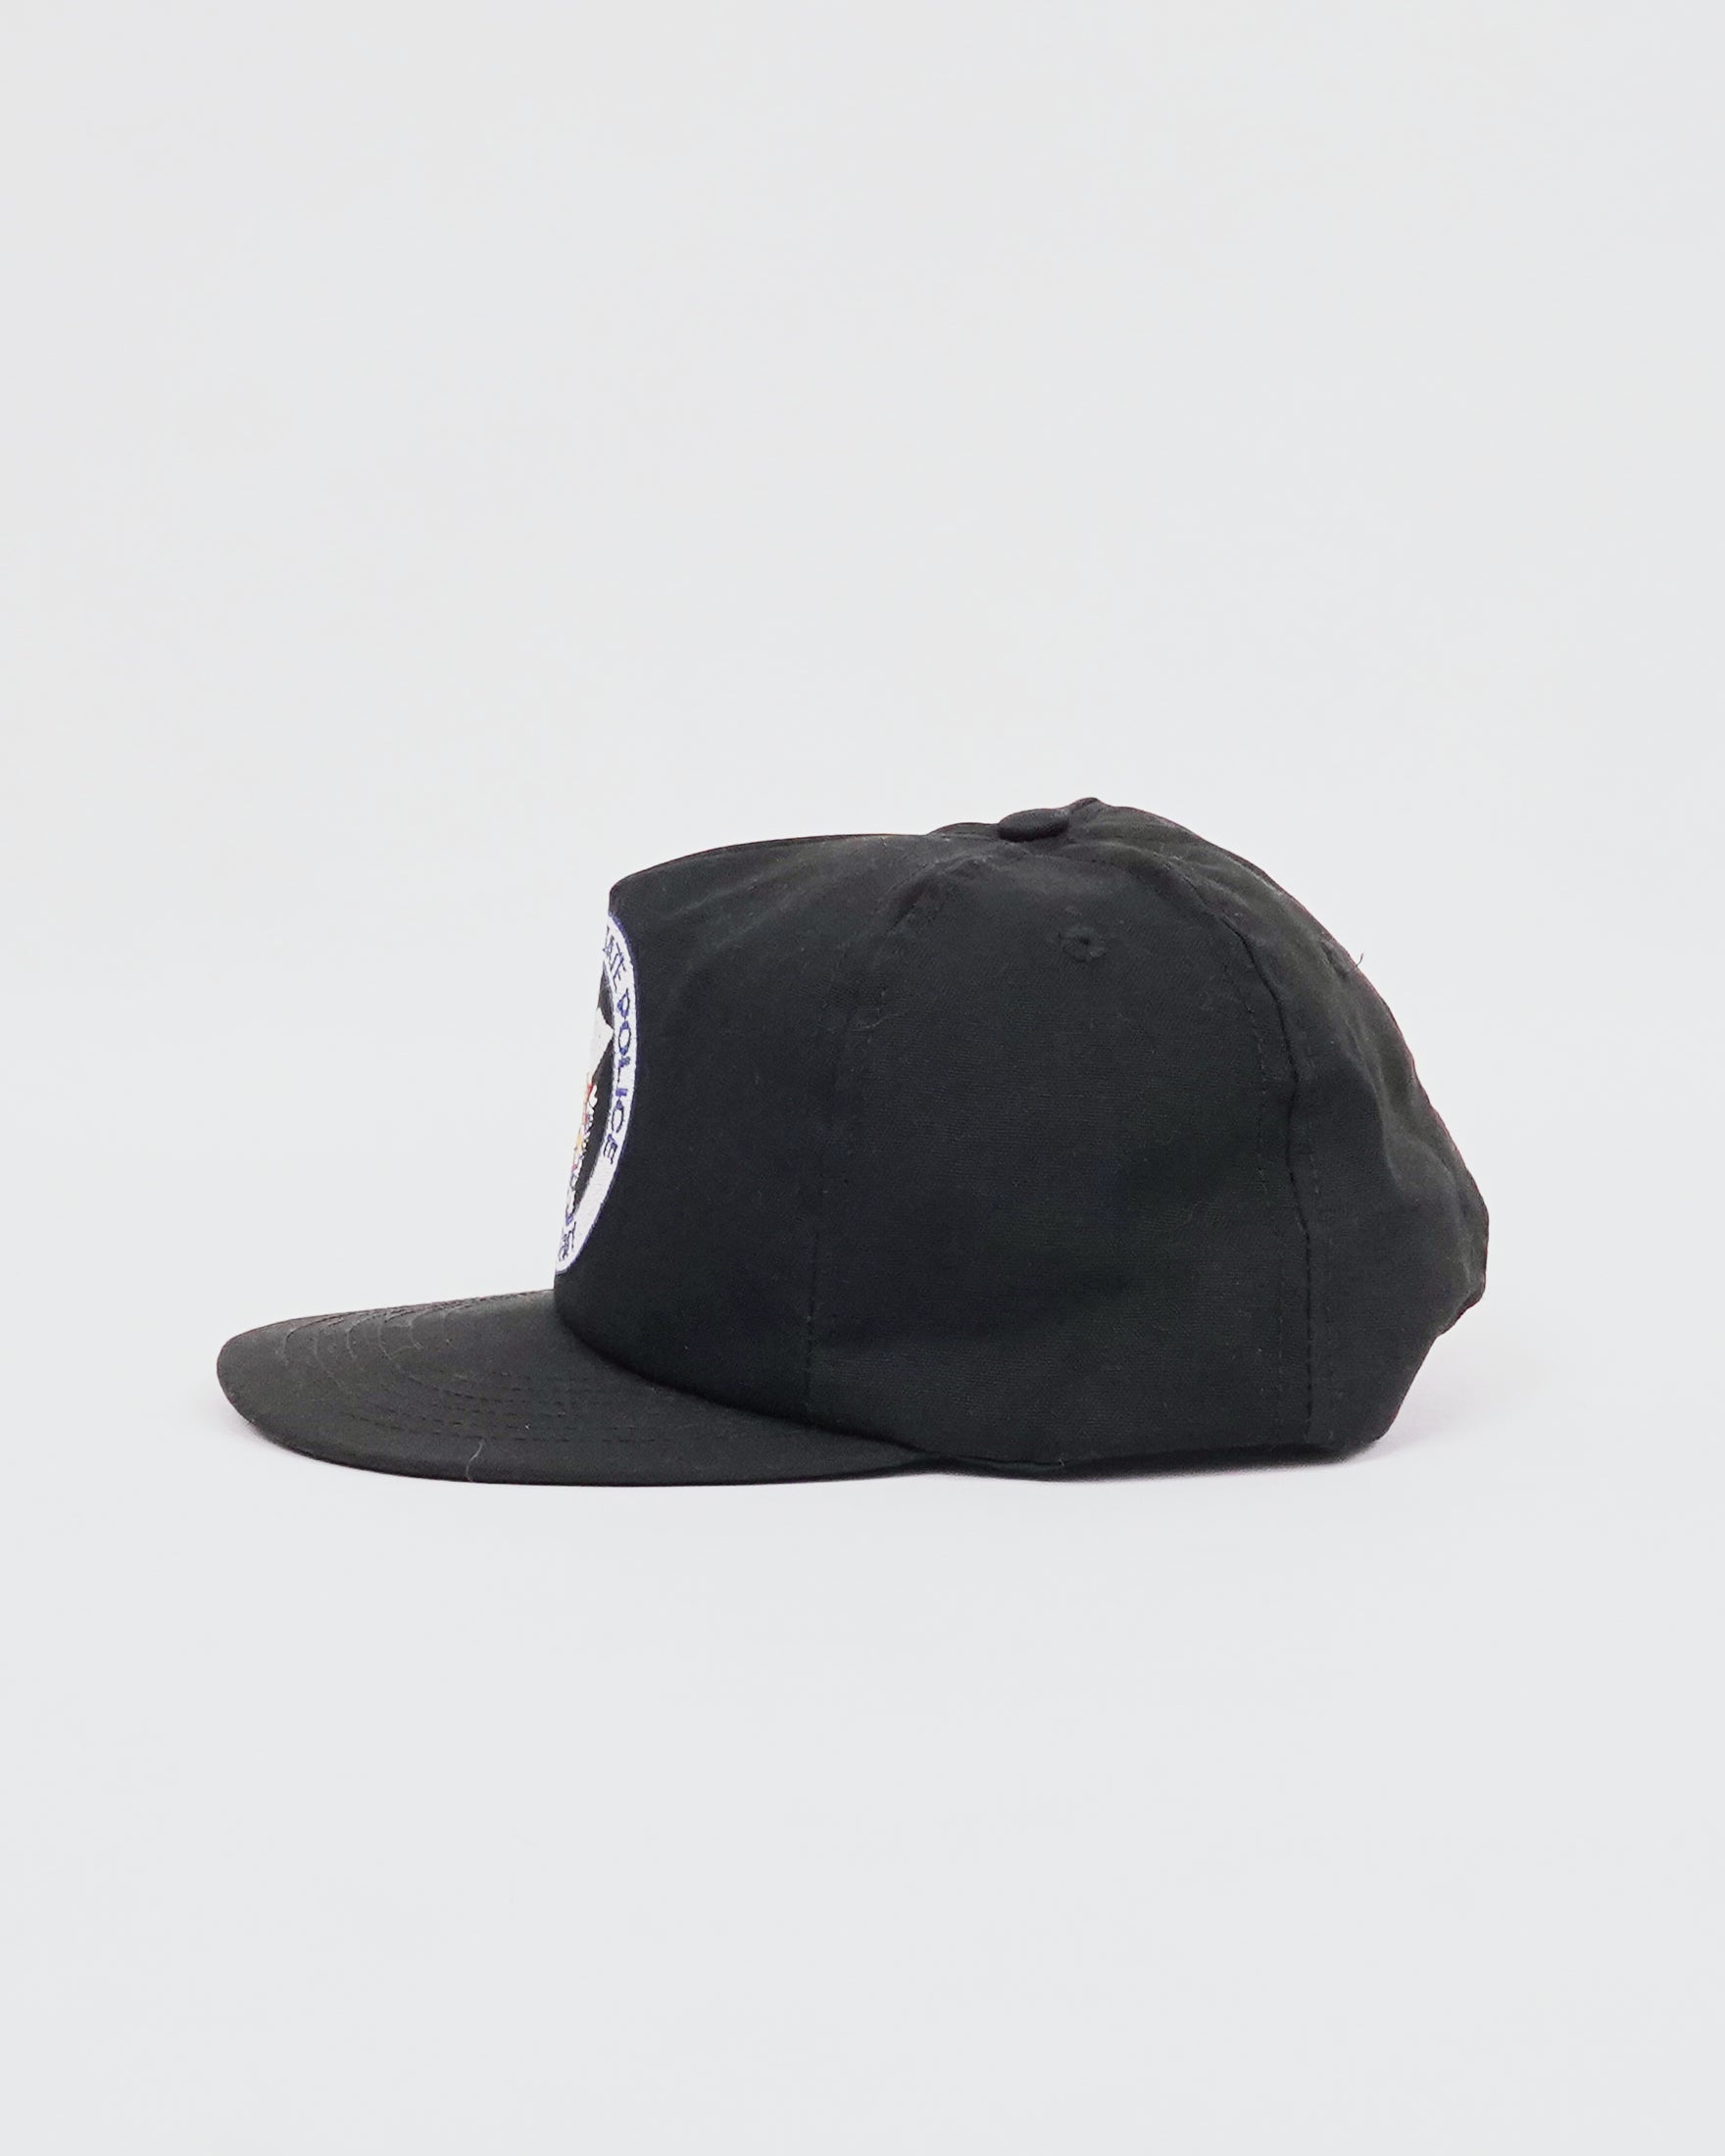 NYS Police Embroidered Cap